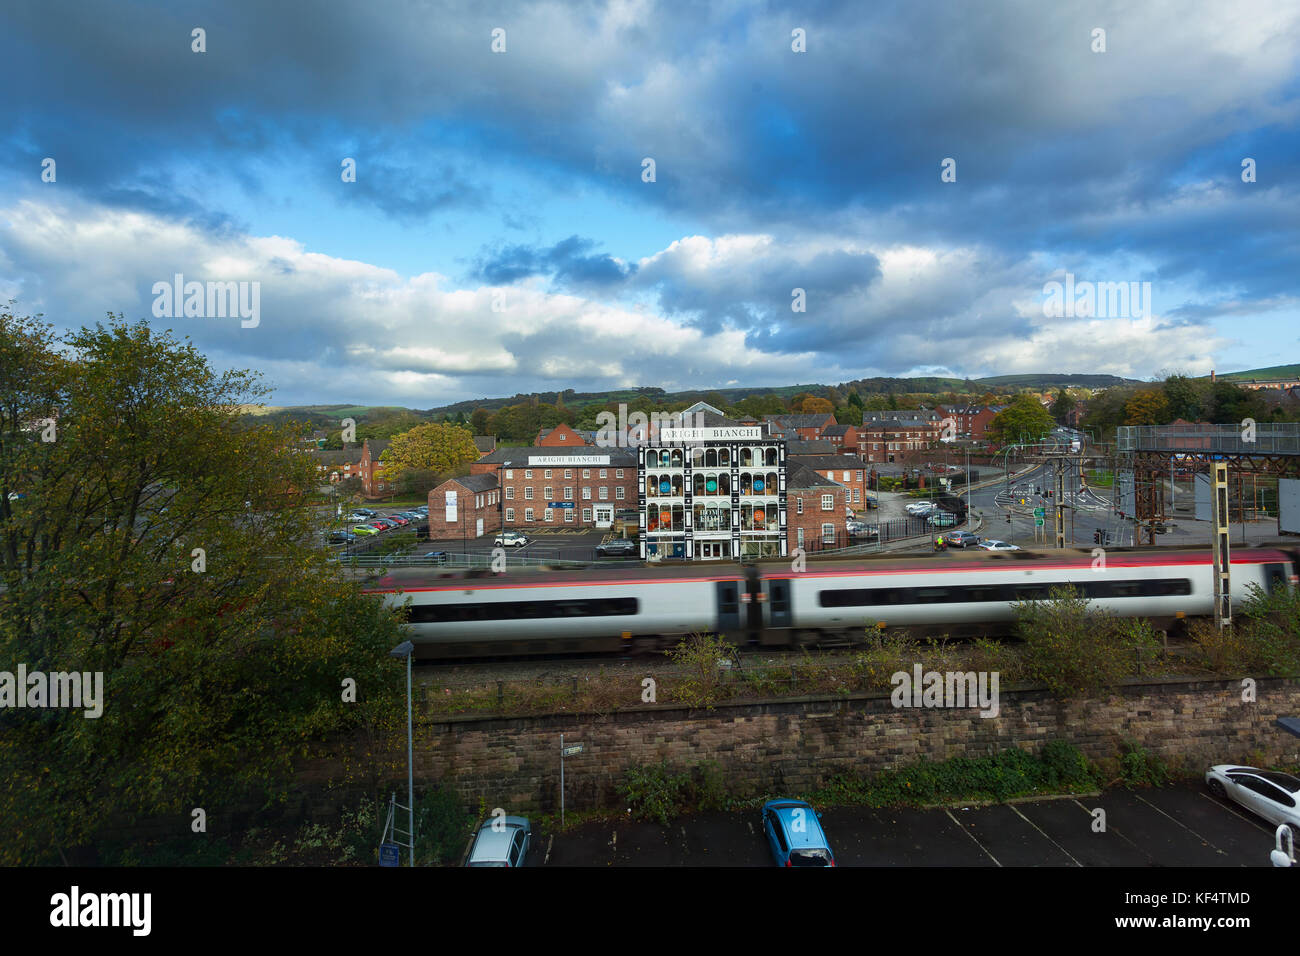 A Virgin Trains Pendolino Train Arriving in to Macclesfield Railway Station Stock Photo